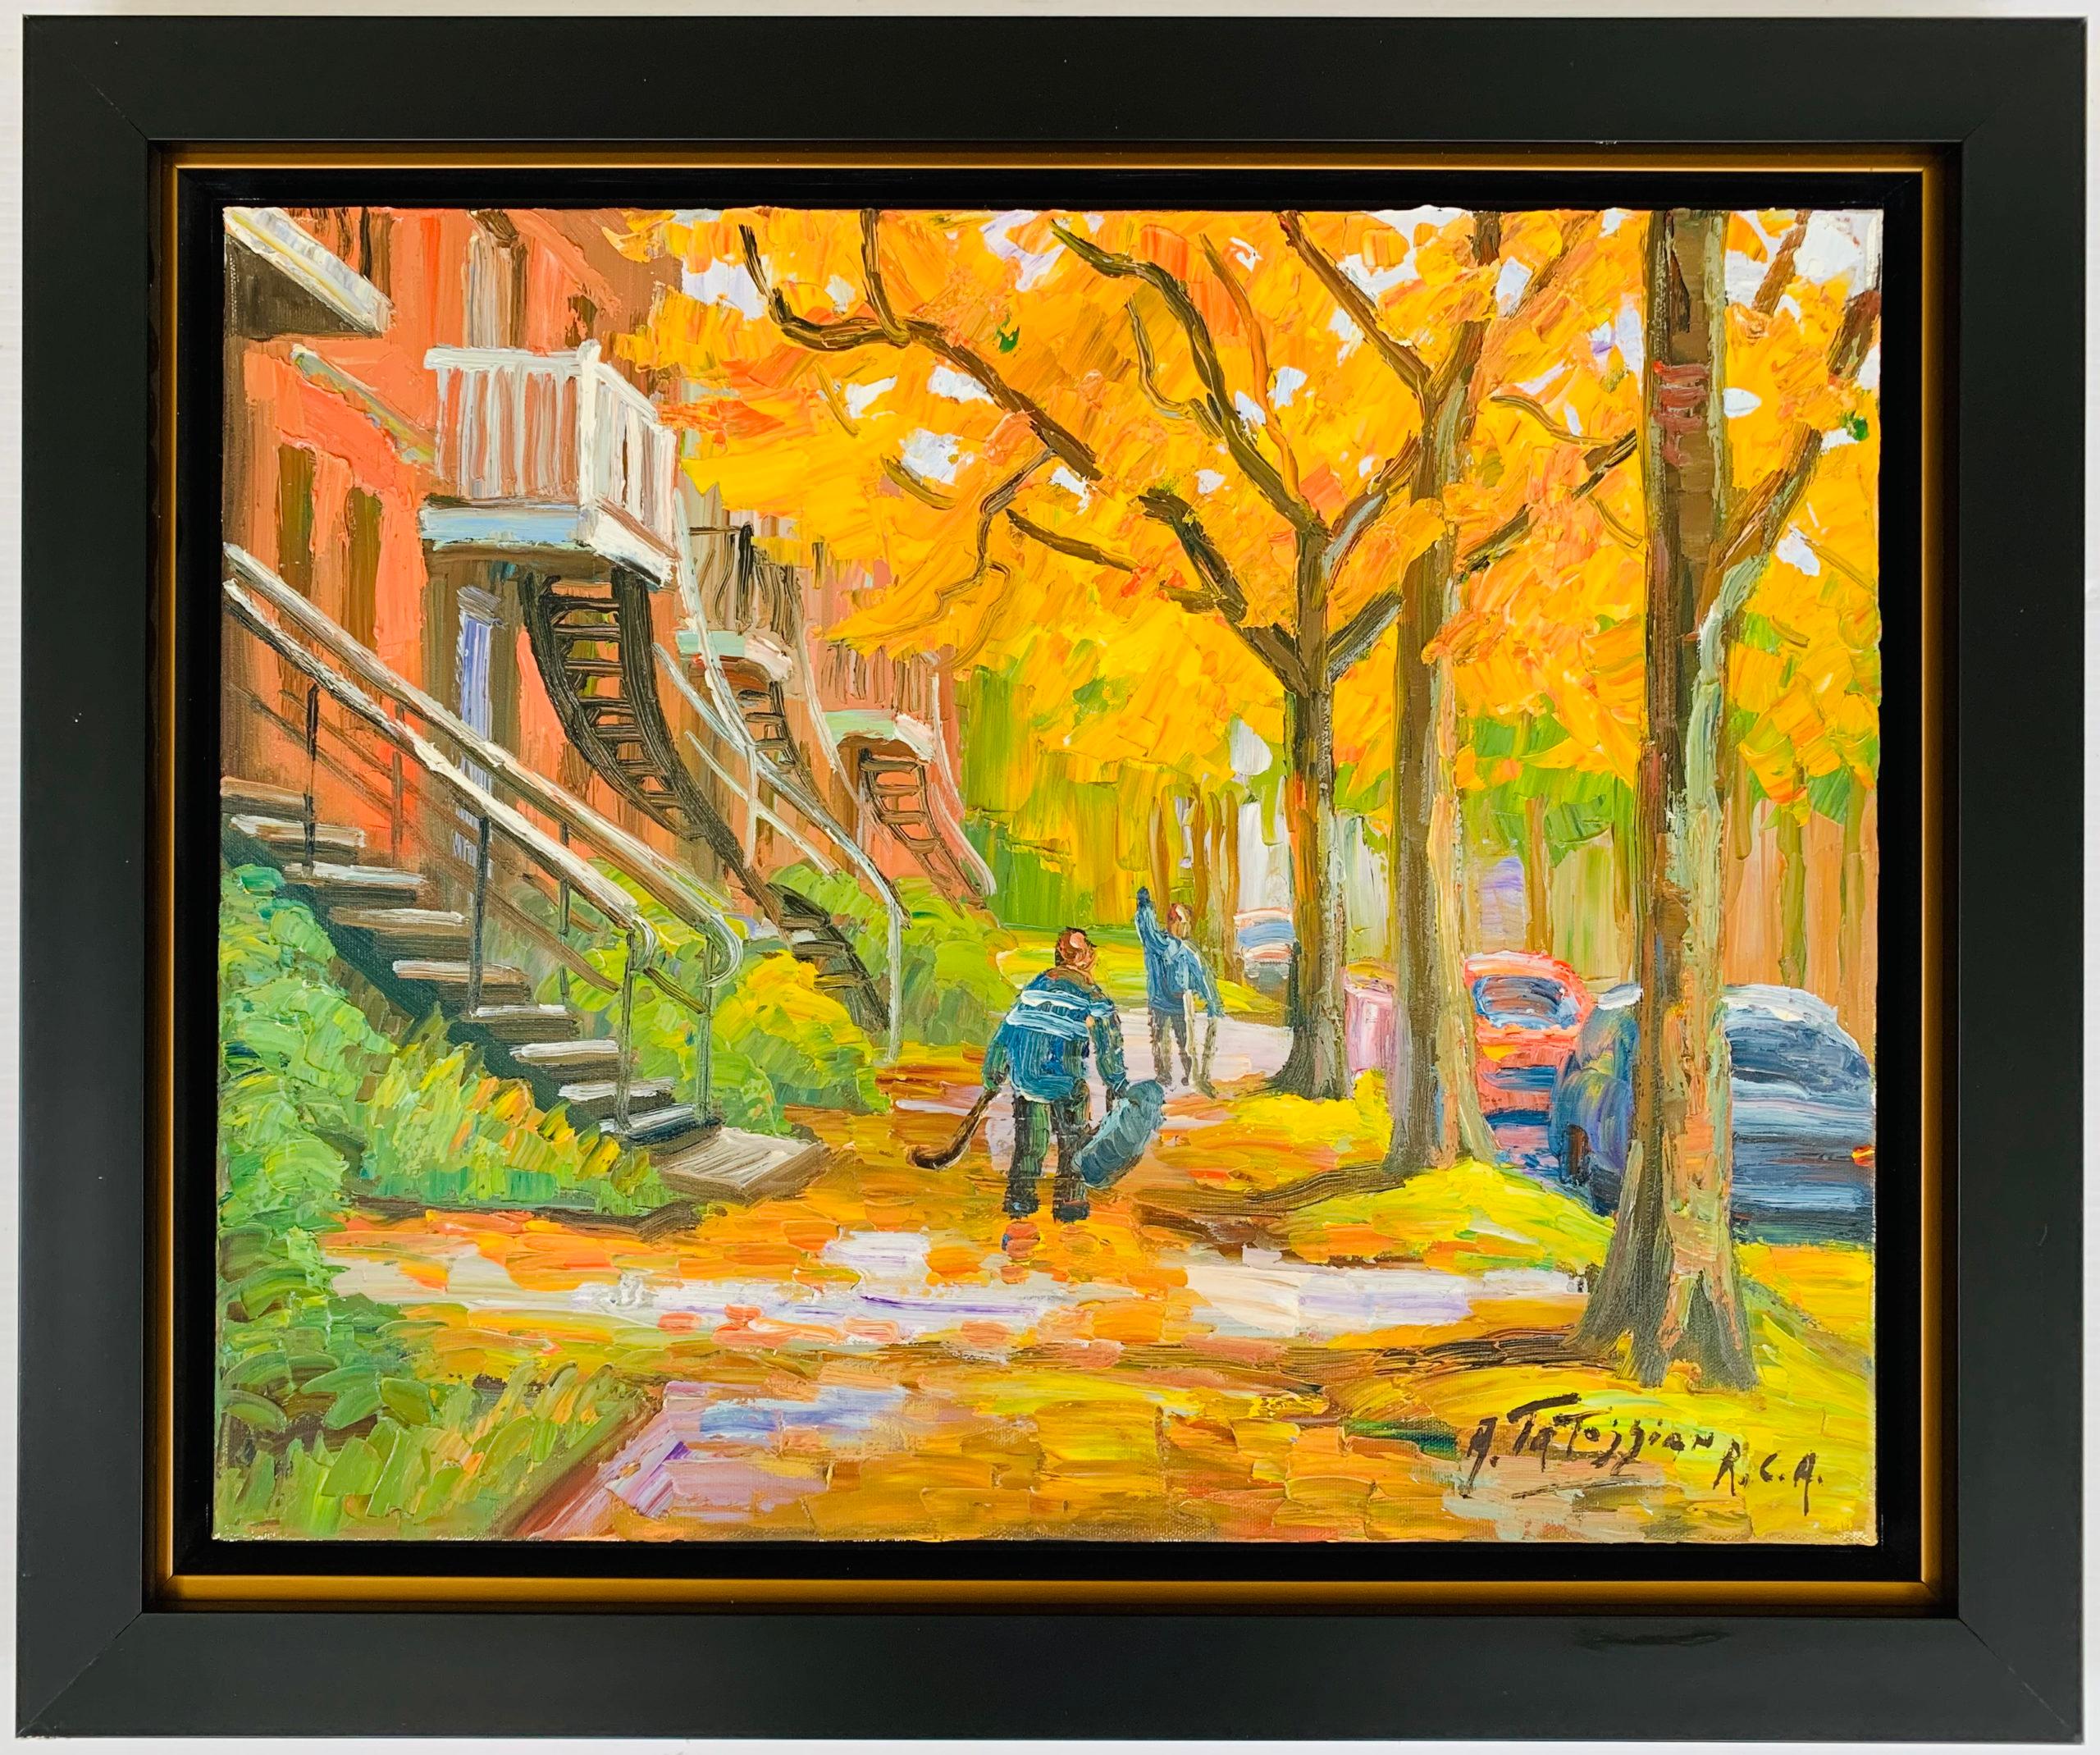 Fall in Montreal - Painting by Armand Tatossian